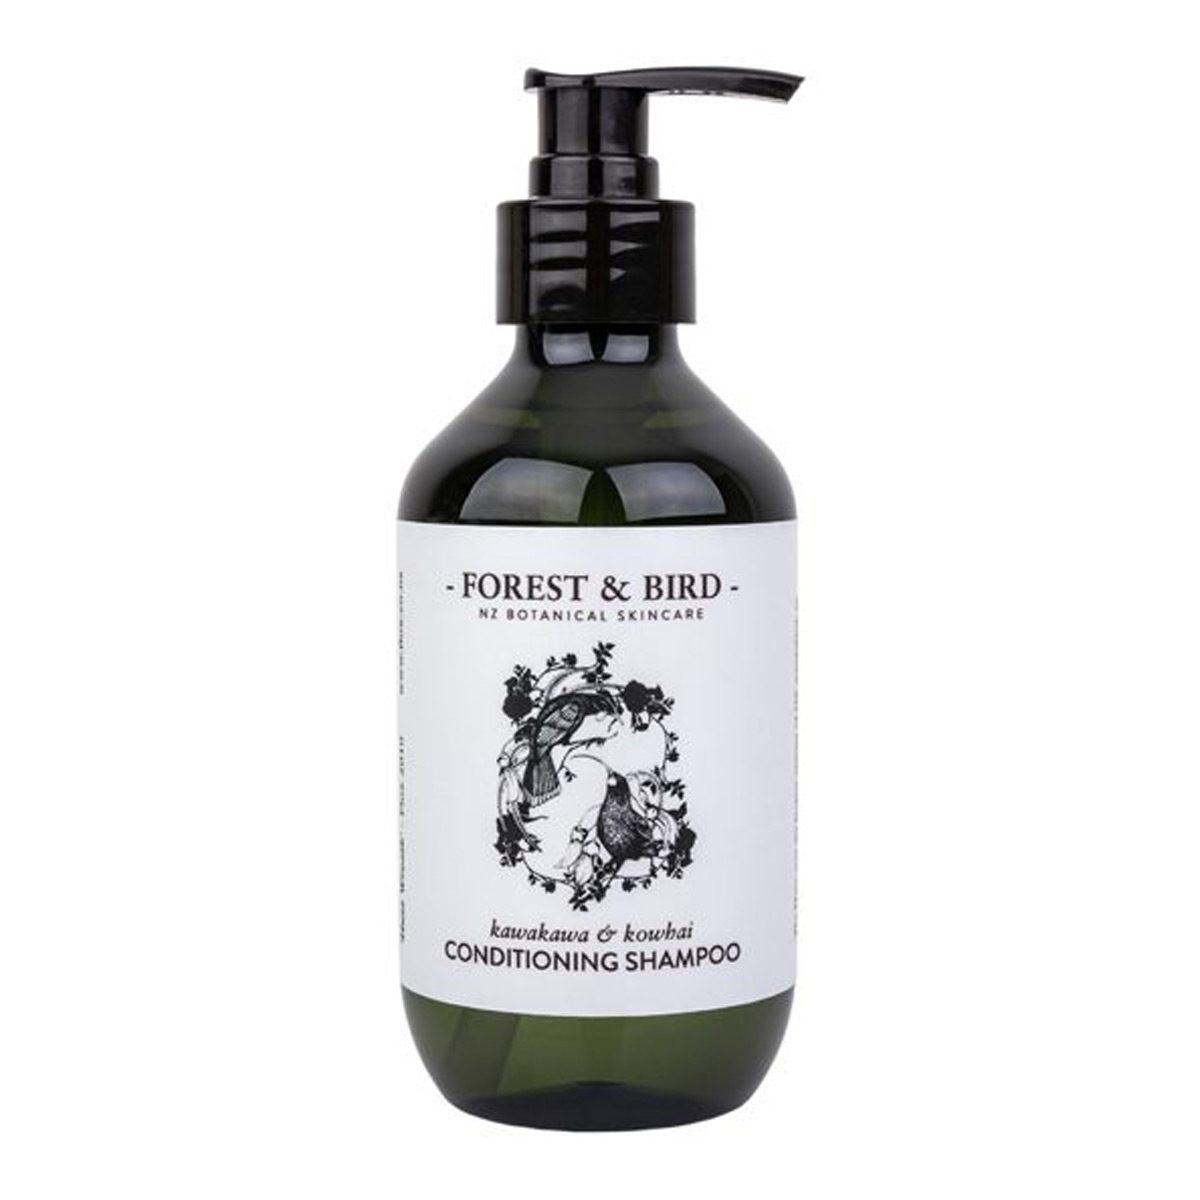 consumables-hospitality-guest-amenities-forest-and-bird-conditioning-shampoo-16x300ml-enriched-native-forest-extracts-manuka-mamaku-vjs-distributors-HUIACSBR